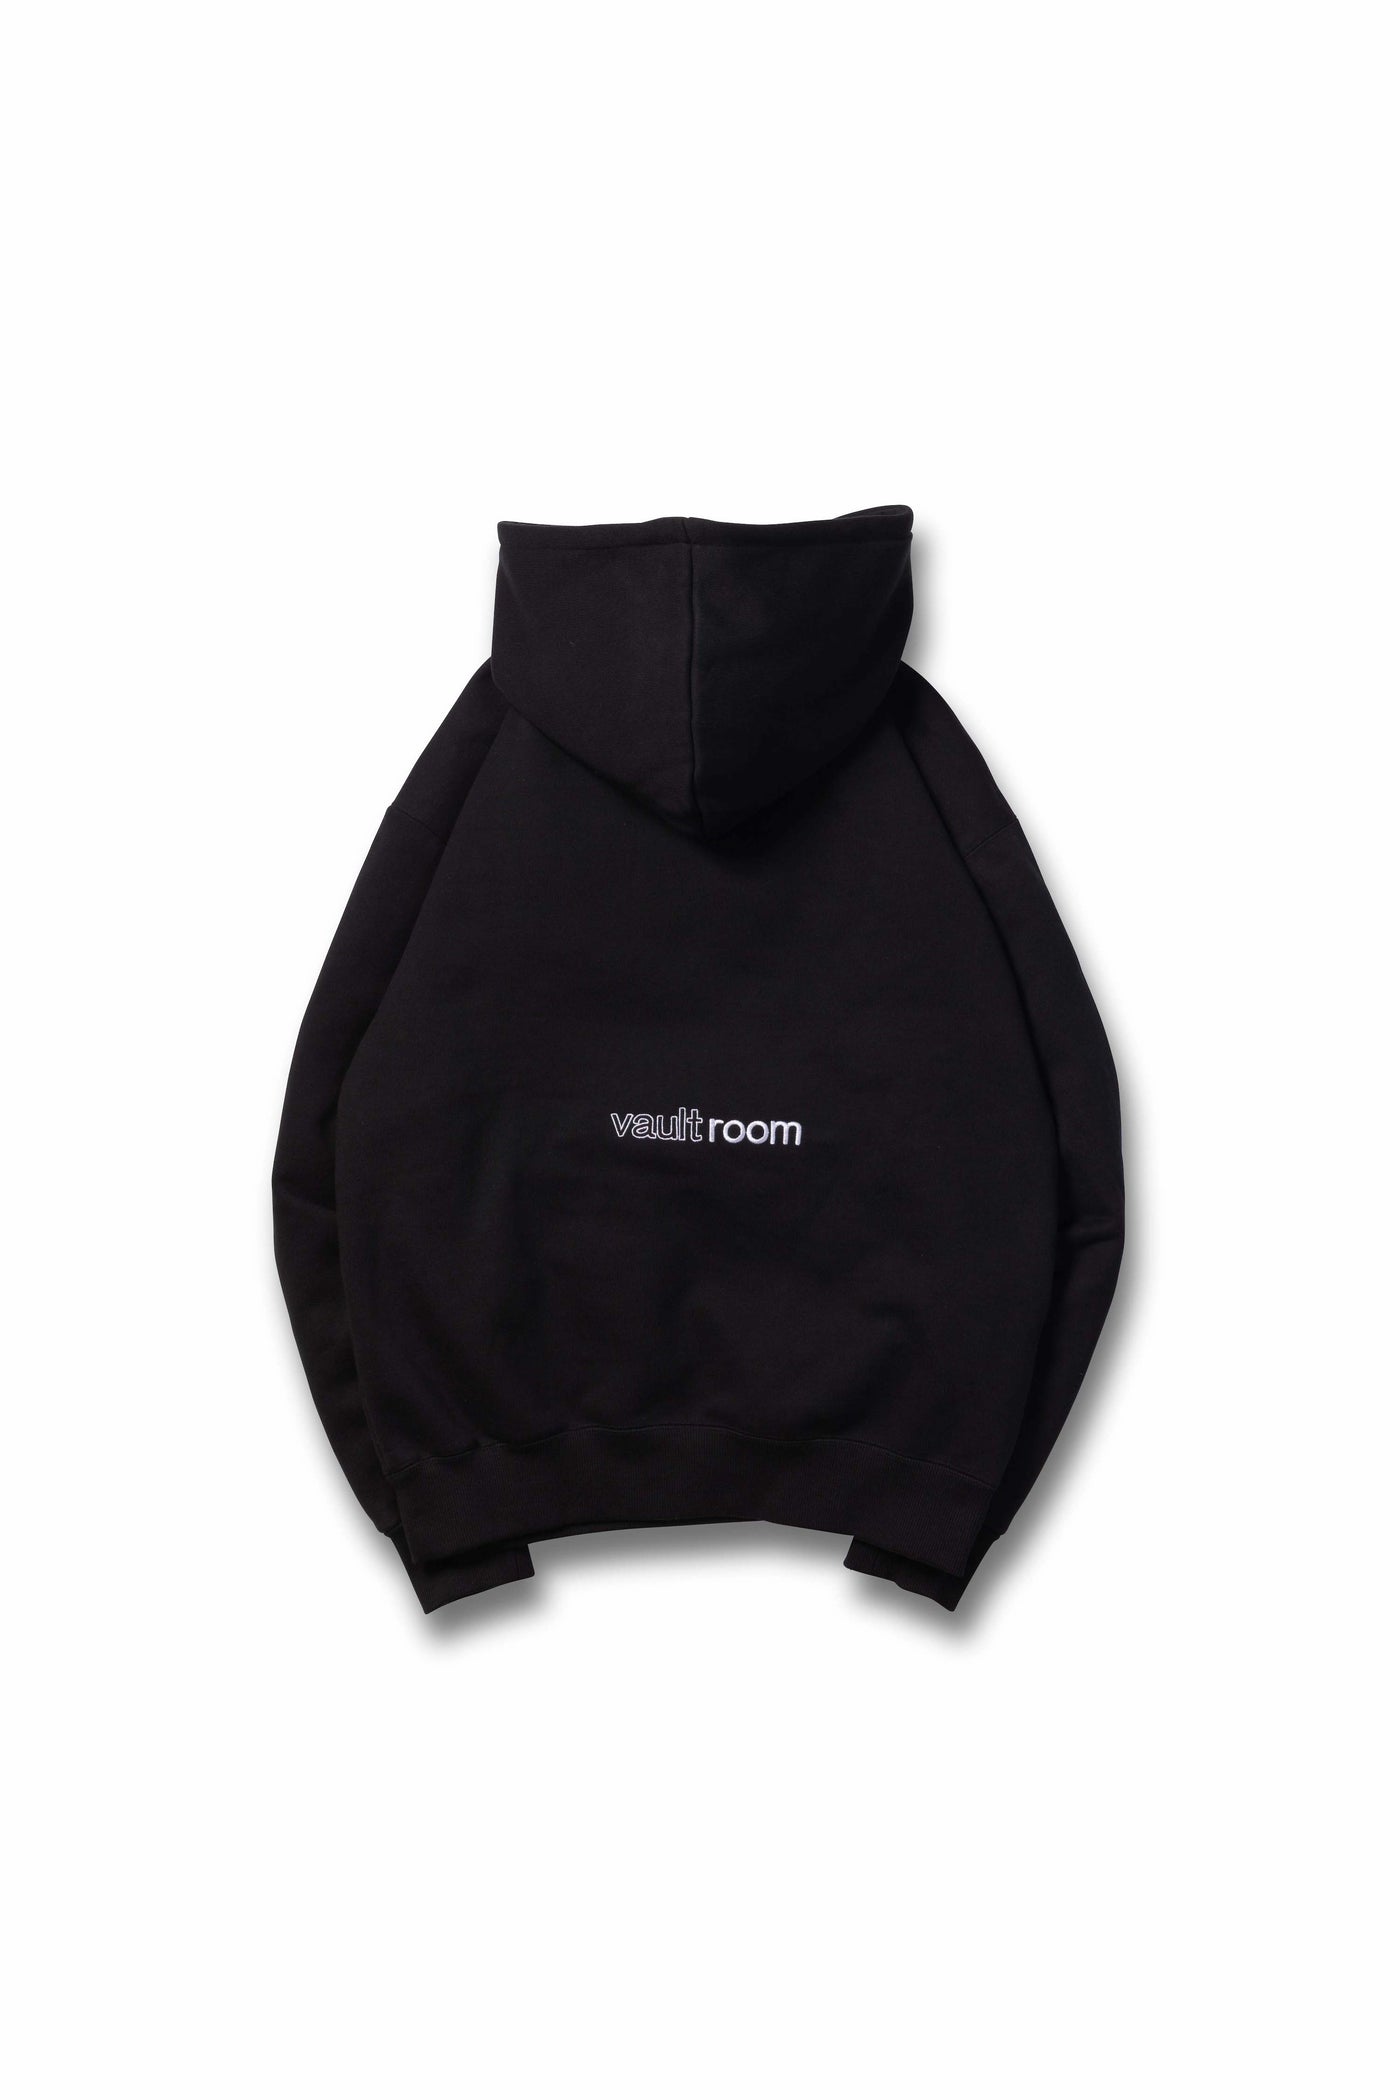 ROM ONLY HOODIE / BLK